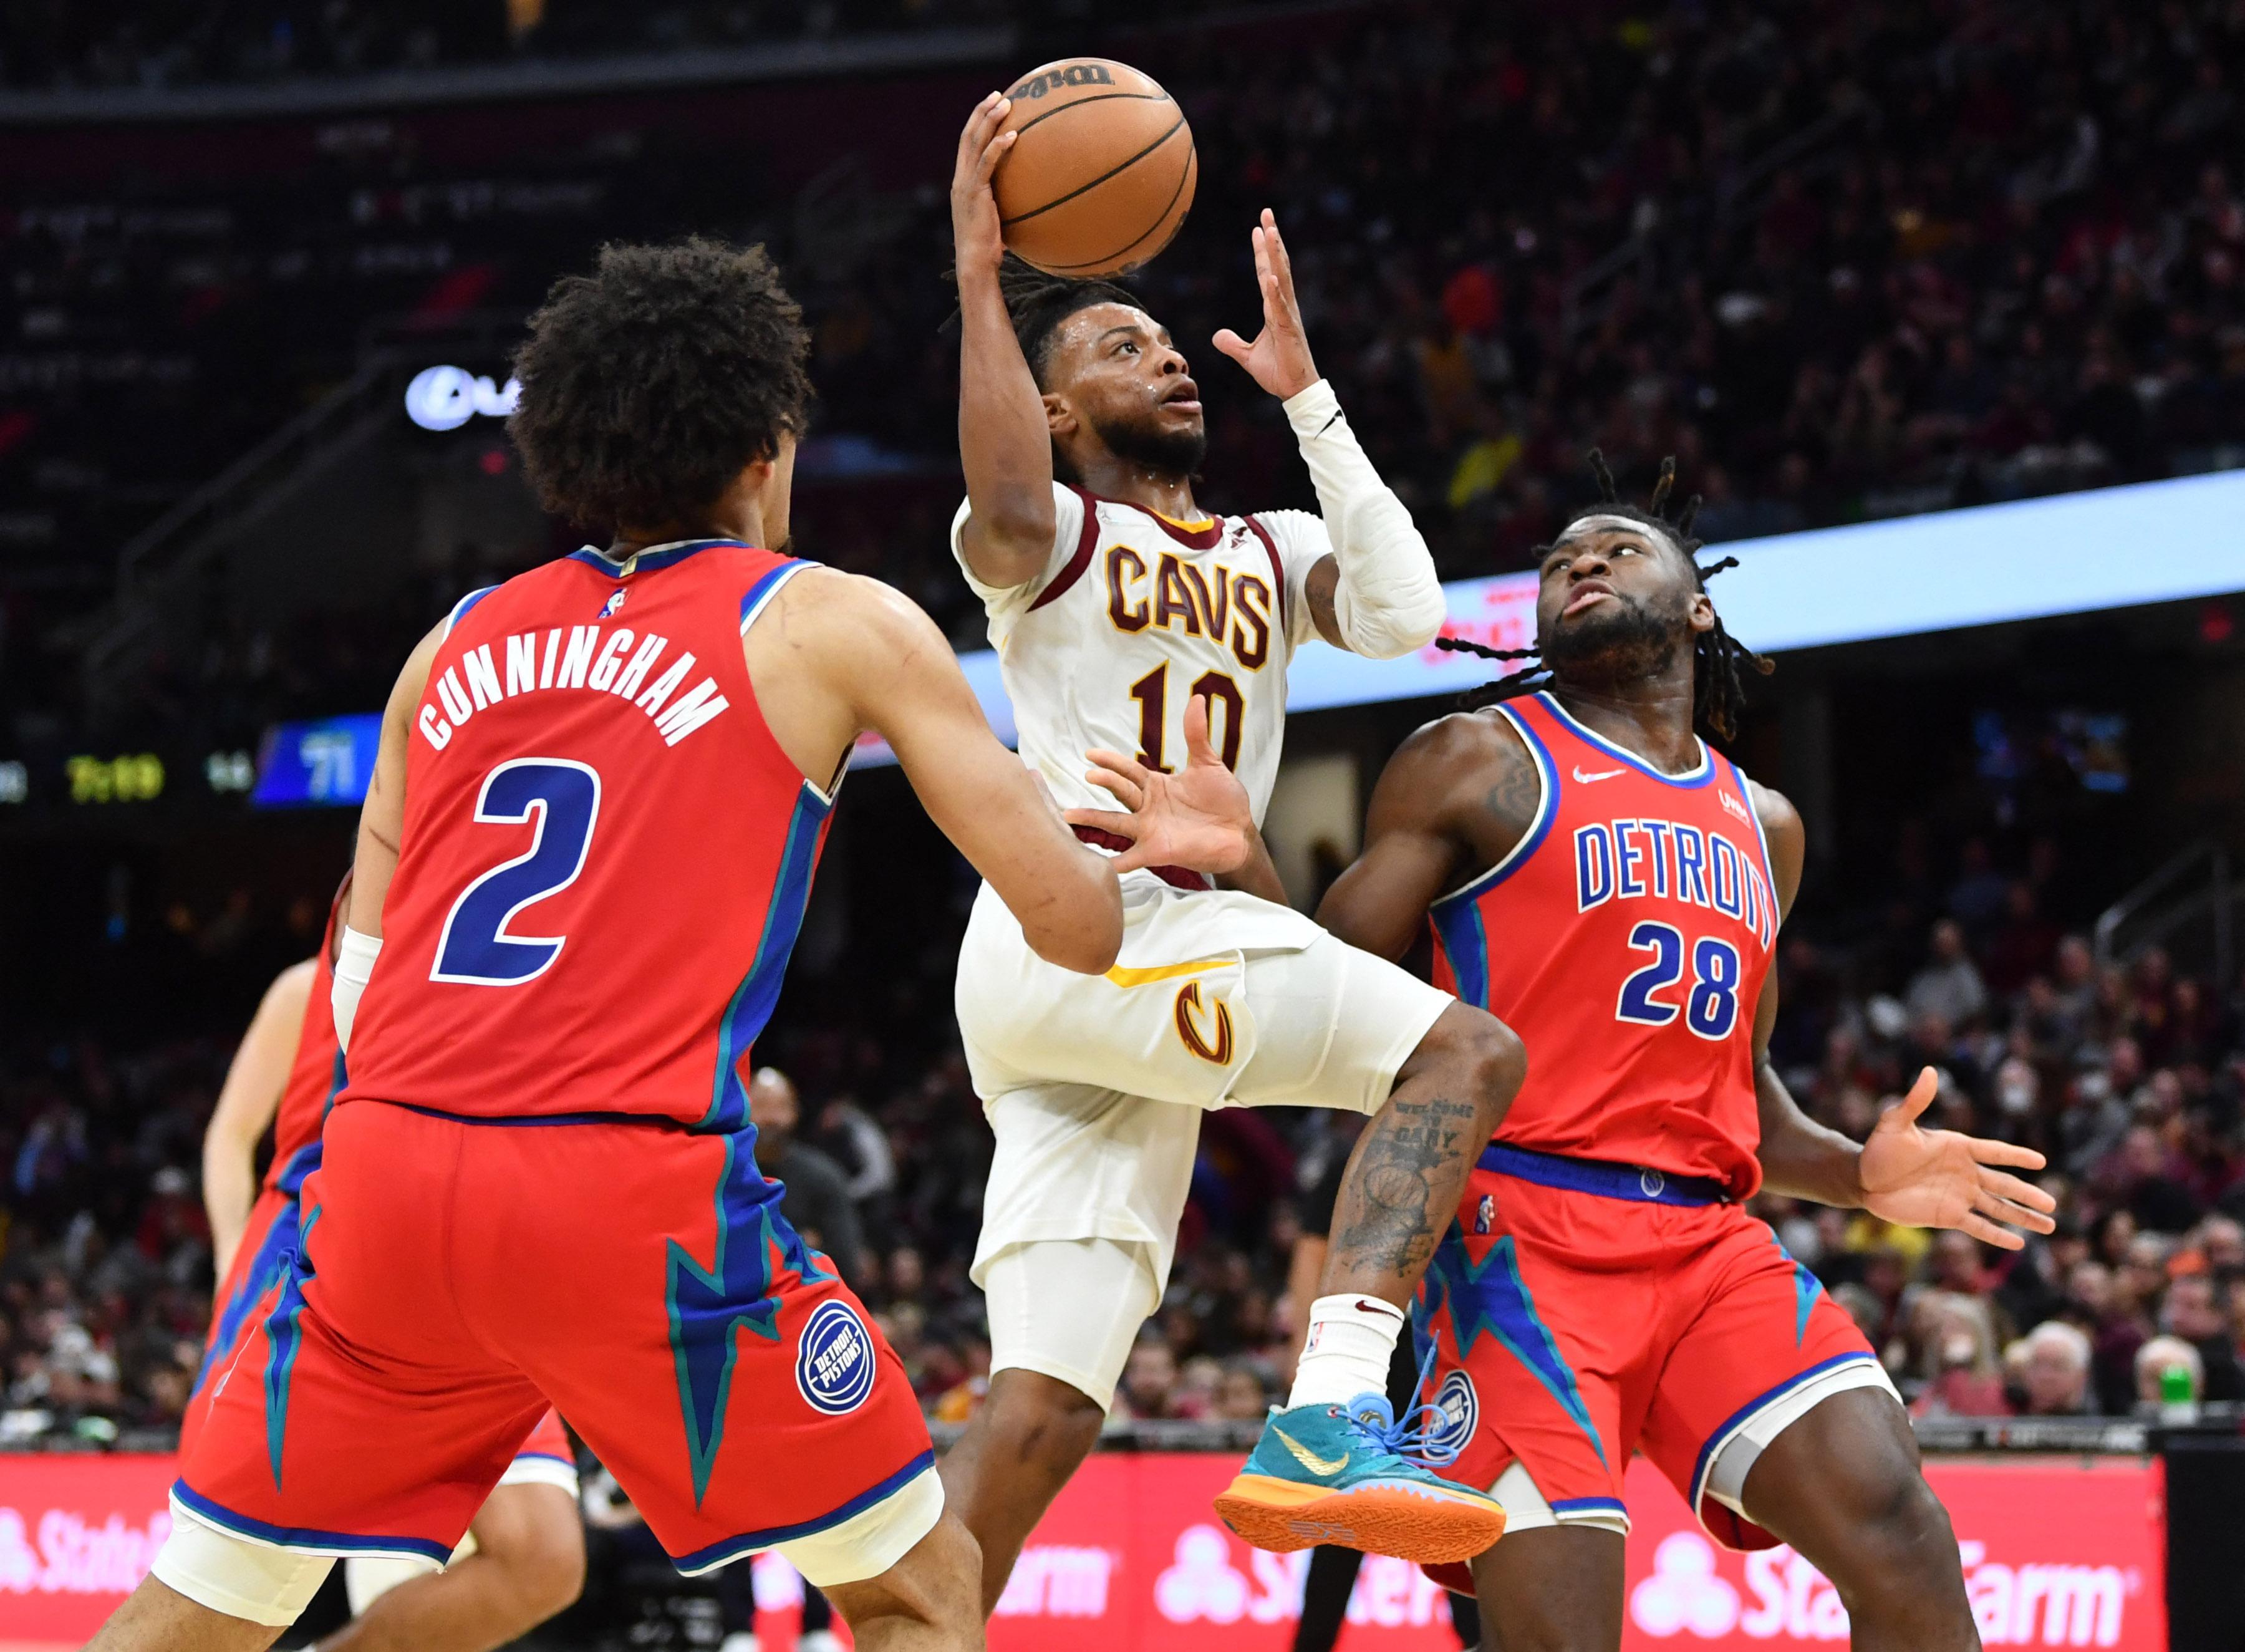 Cleveland Cavaliers rally in second half to top Detroit Pistons